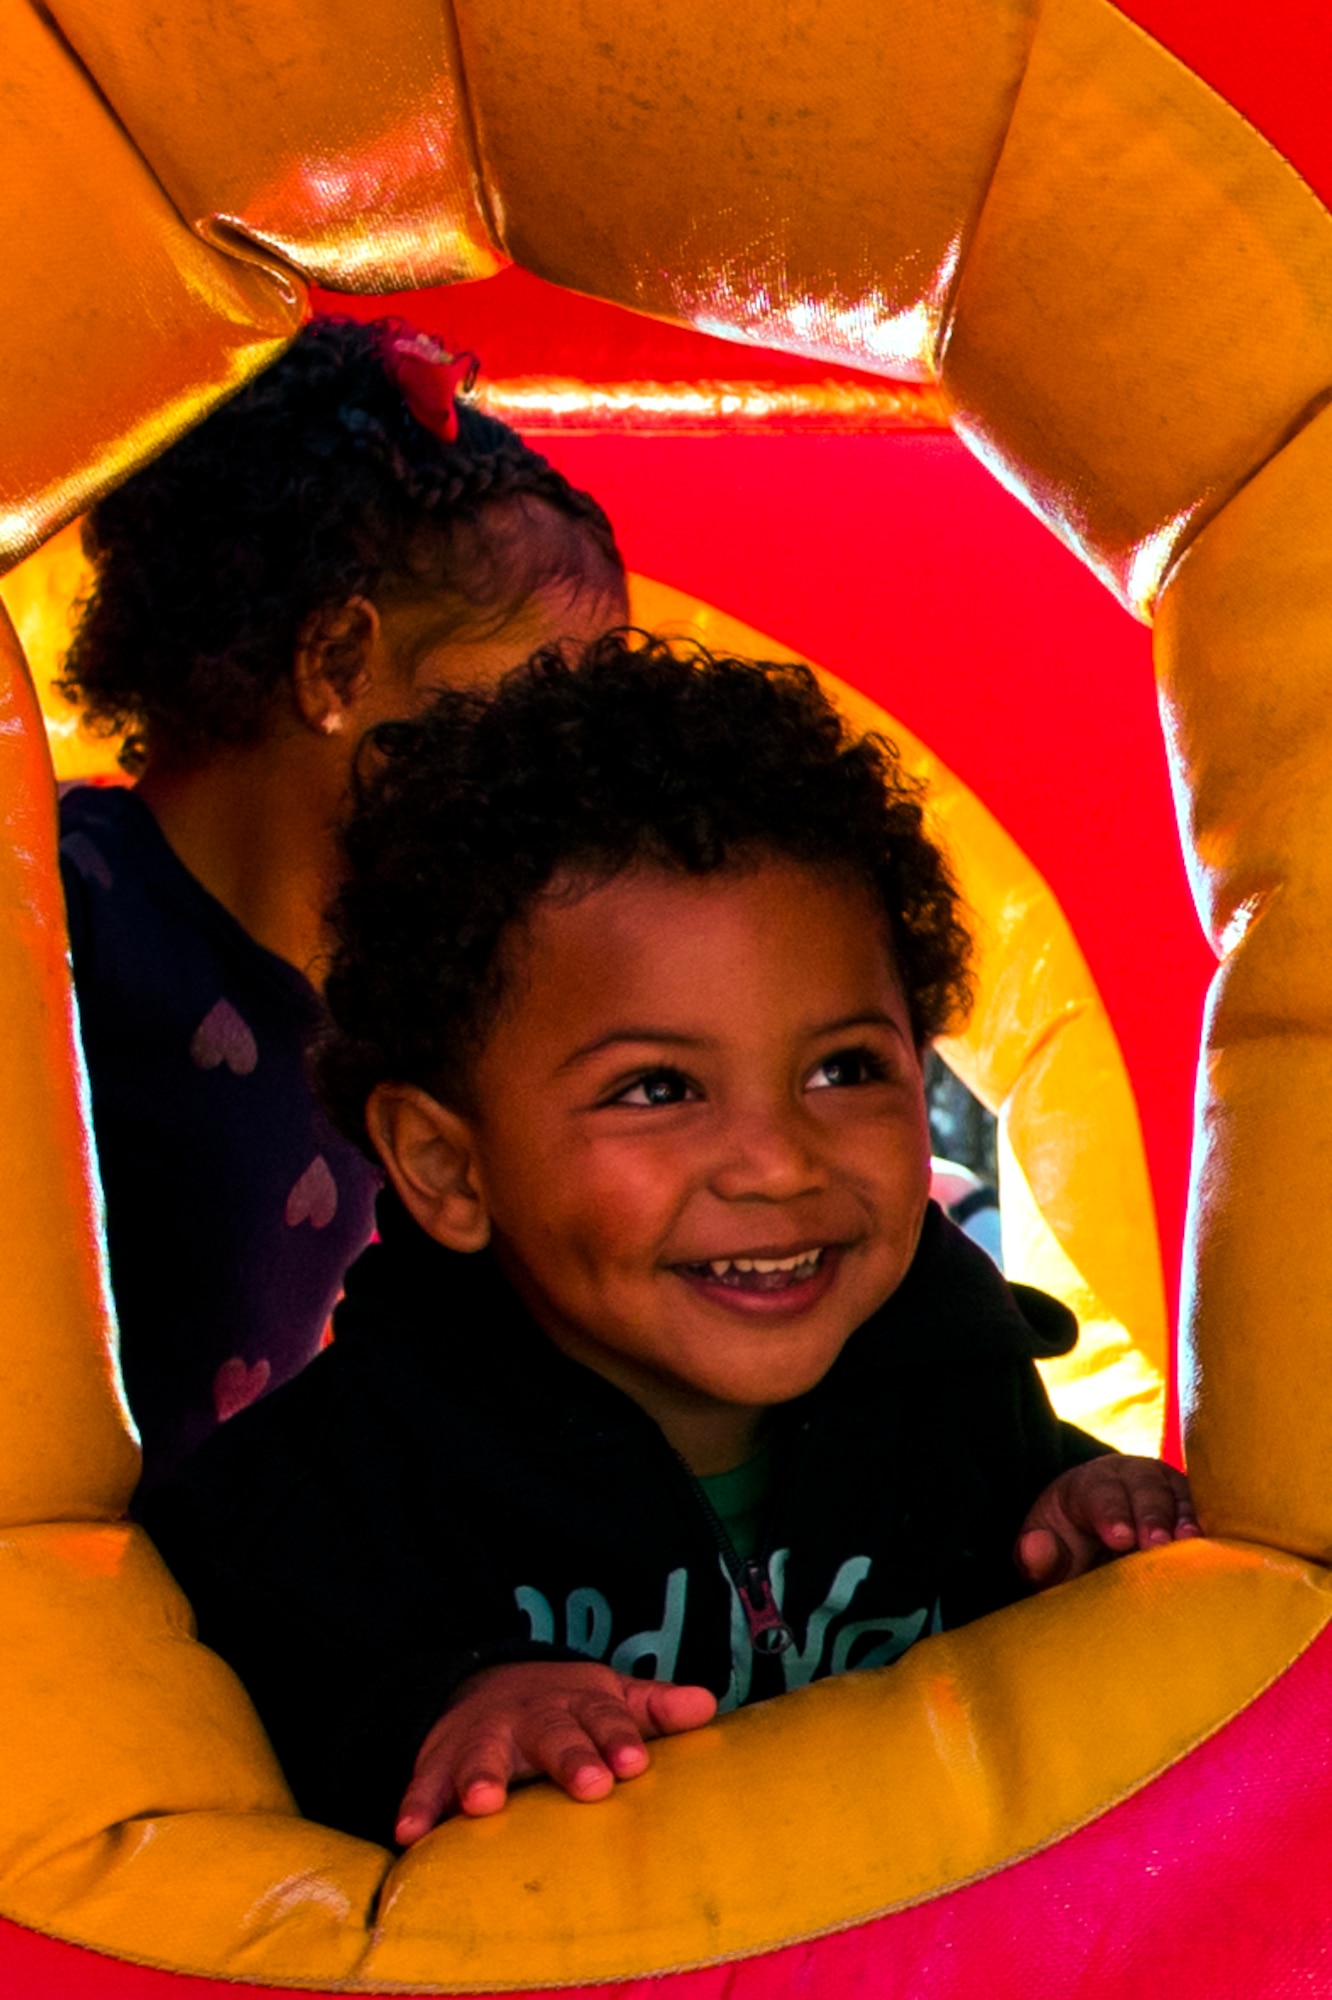 The son of Tech. Sgt. Renata Garcia, 4th Force Support Squadron career development, plays in a bounce house during the annual Military Family Appreciation event, Nov. 5, 2016, at Seymour Johnson Air Force Base, North Carolina. The annual event is held to honor family members who face unique difficulties and challenges associated with military life. (U.S. Air Force photo by Airman Shawna L. Keyes)